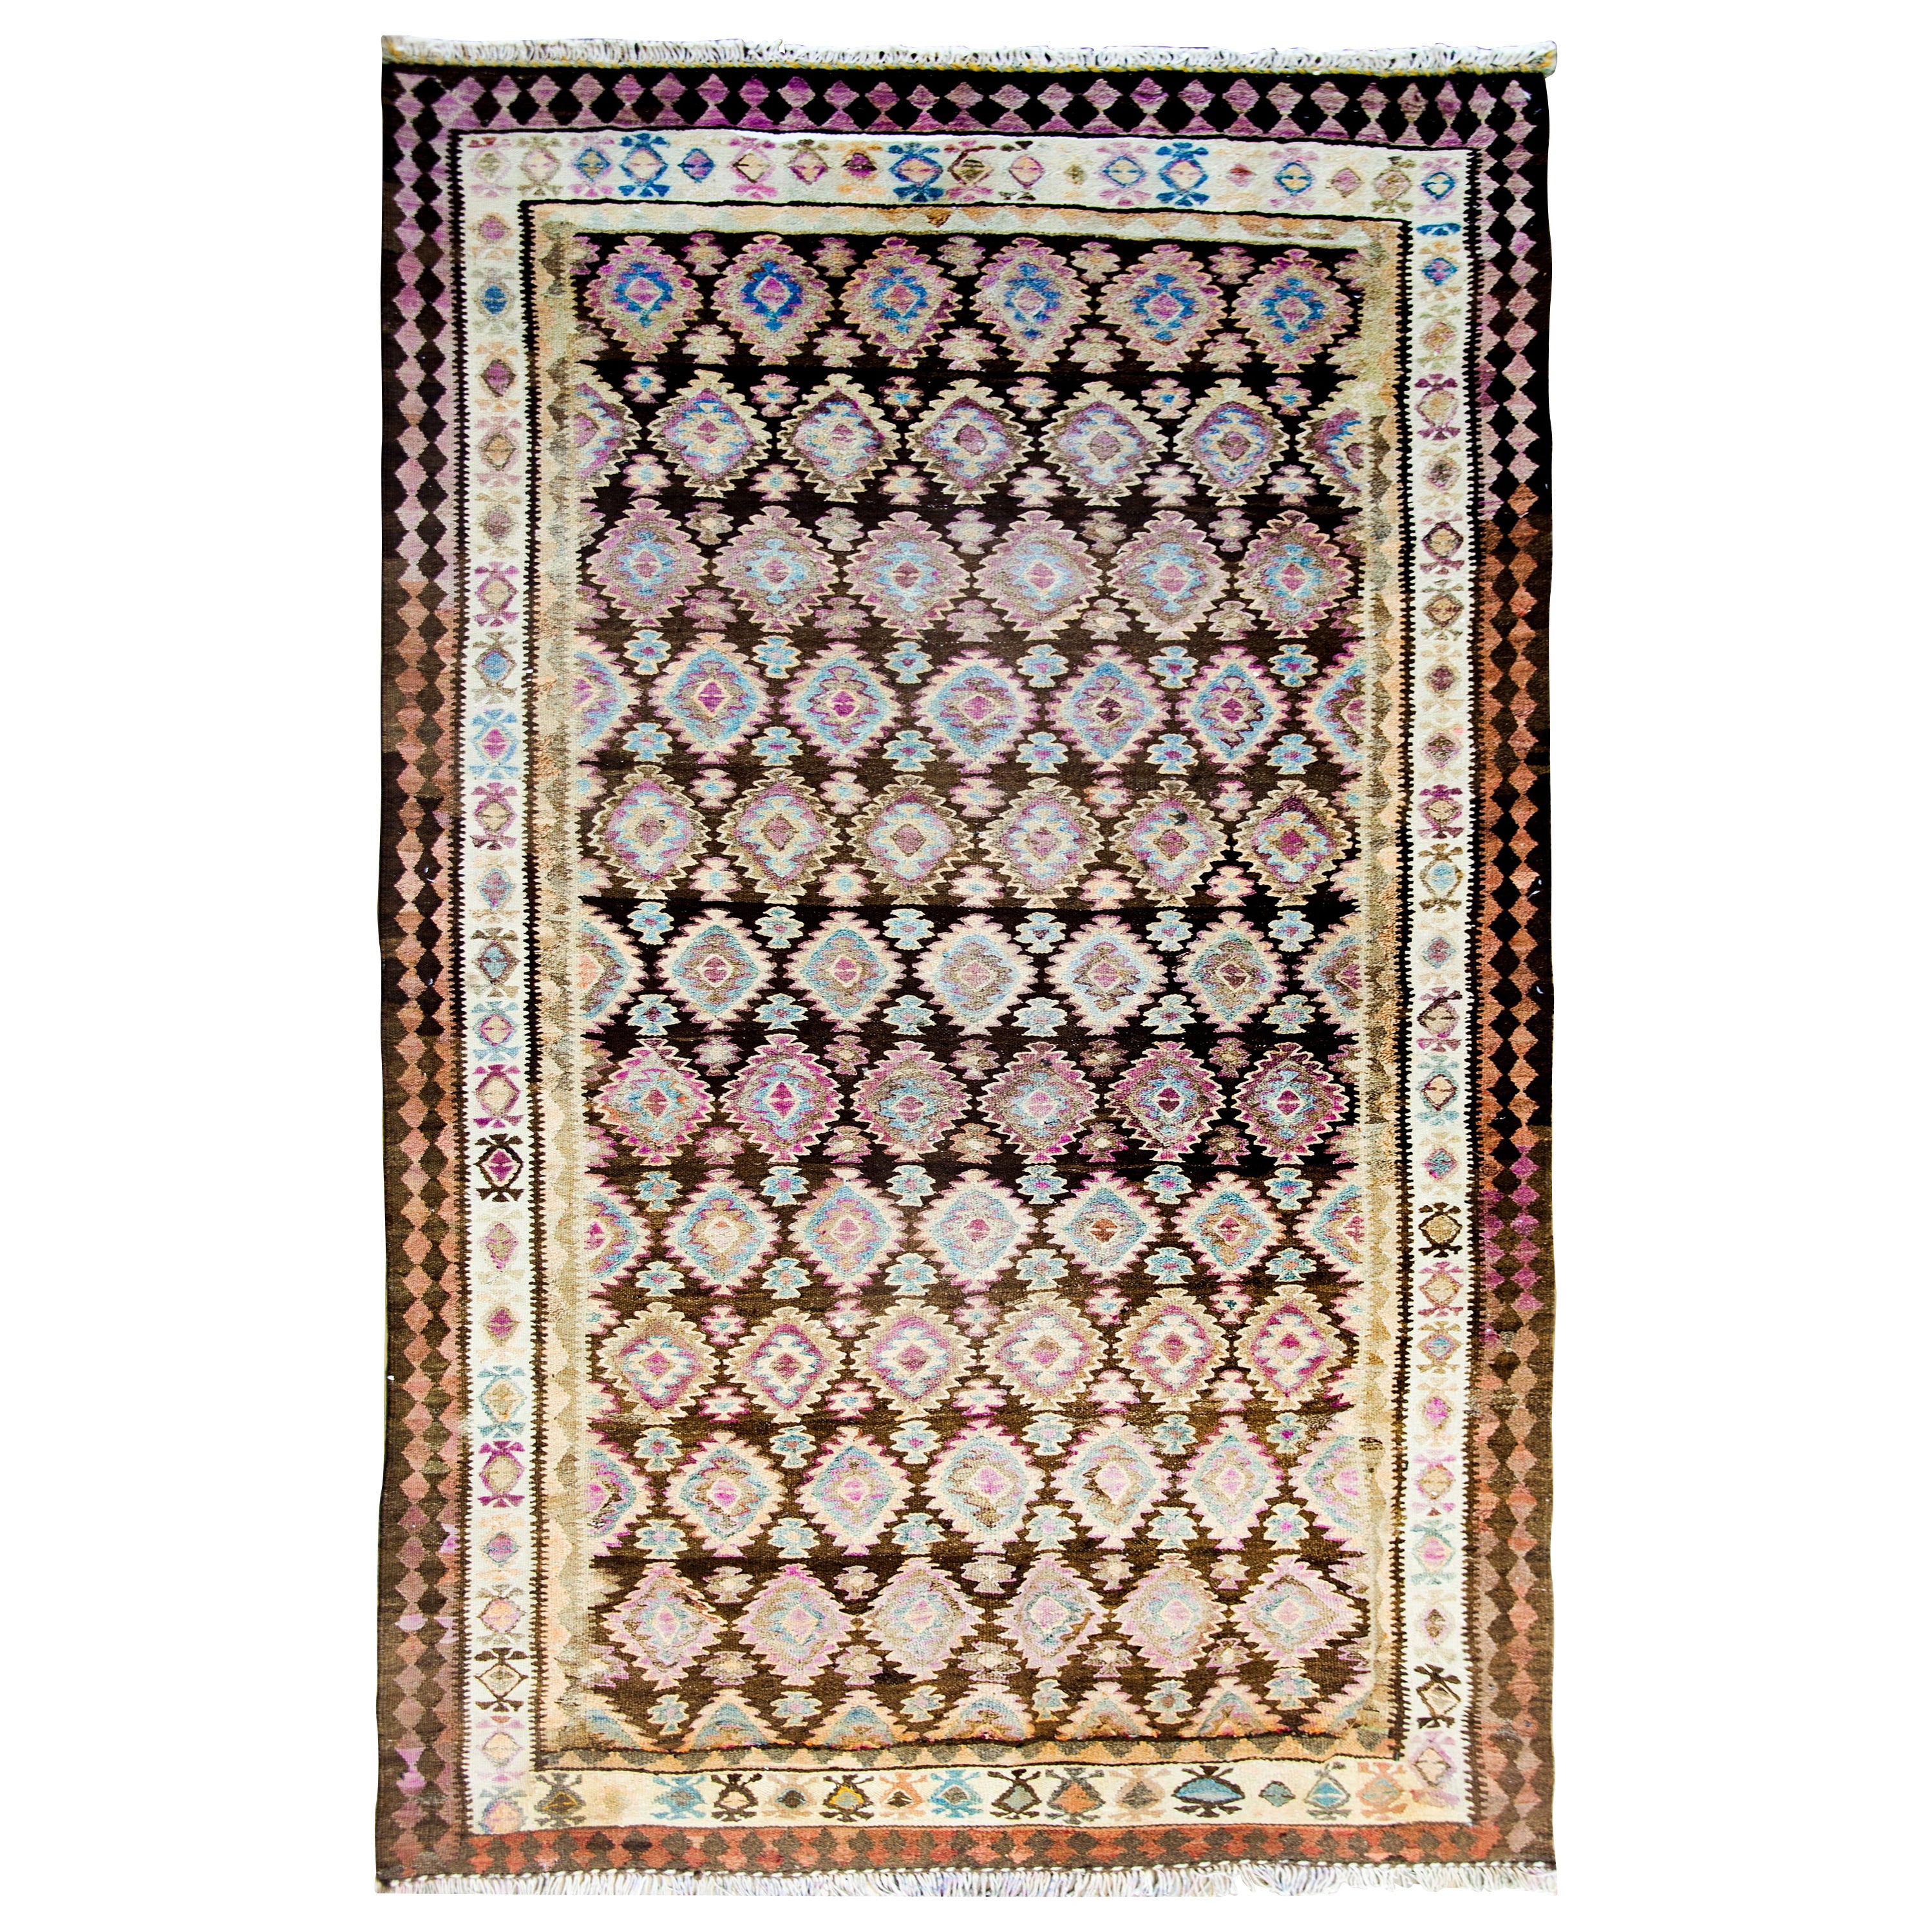 Early 20th Century Persian Qazvin Kilim For Sale